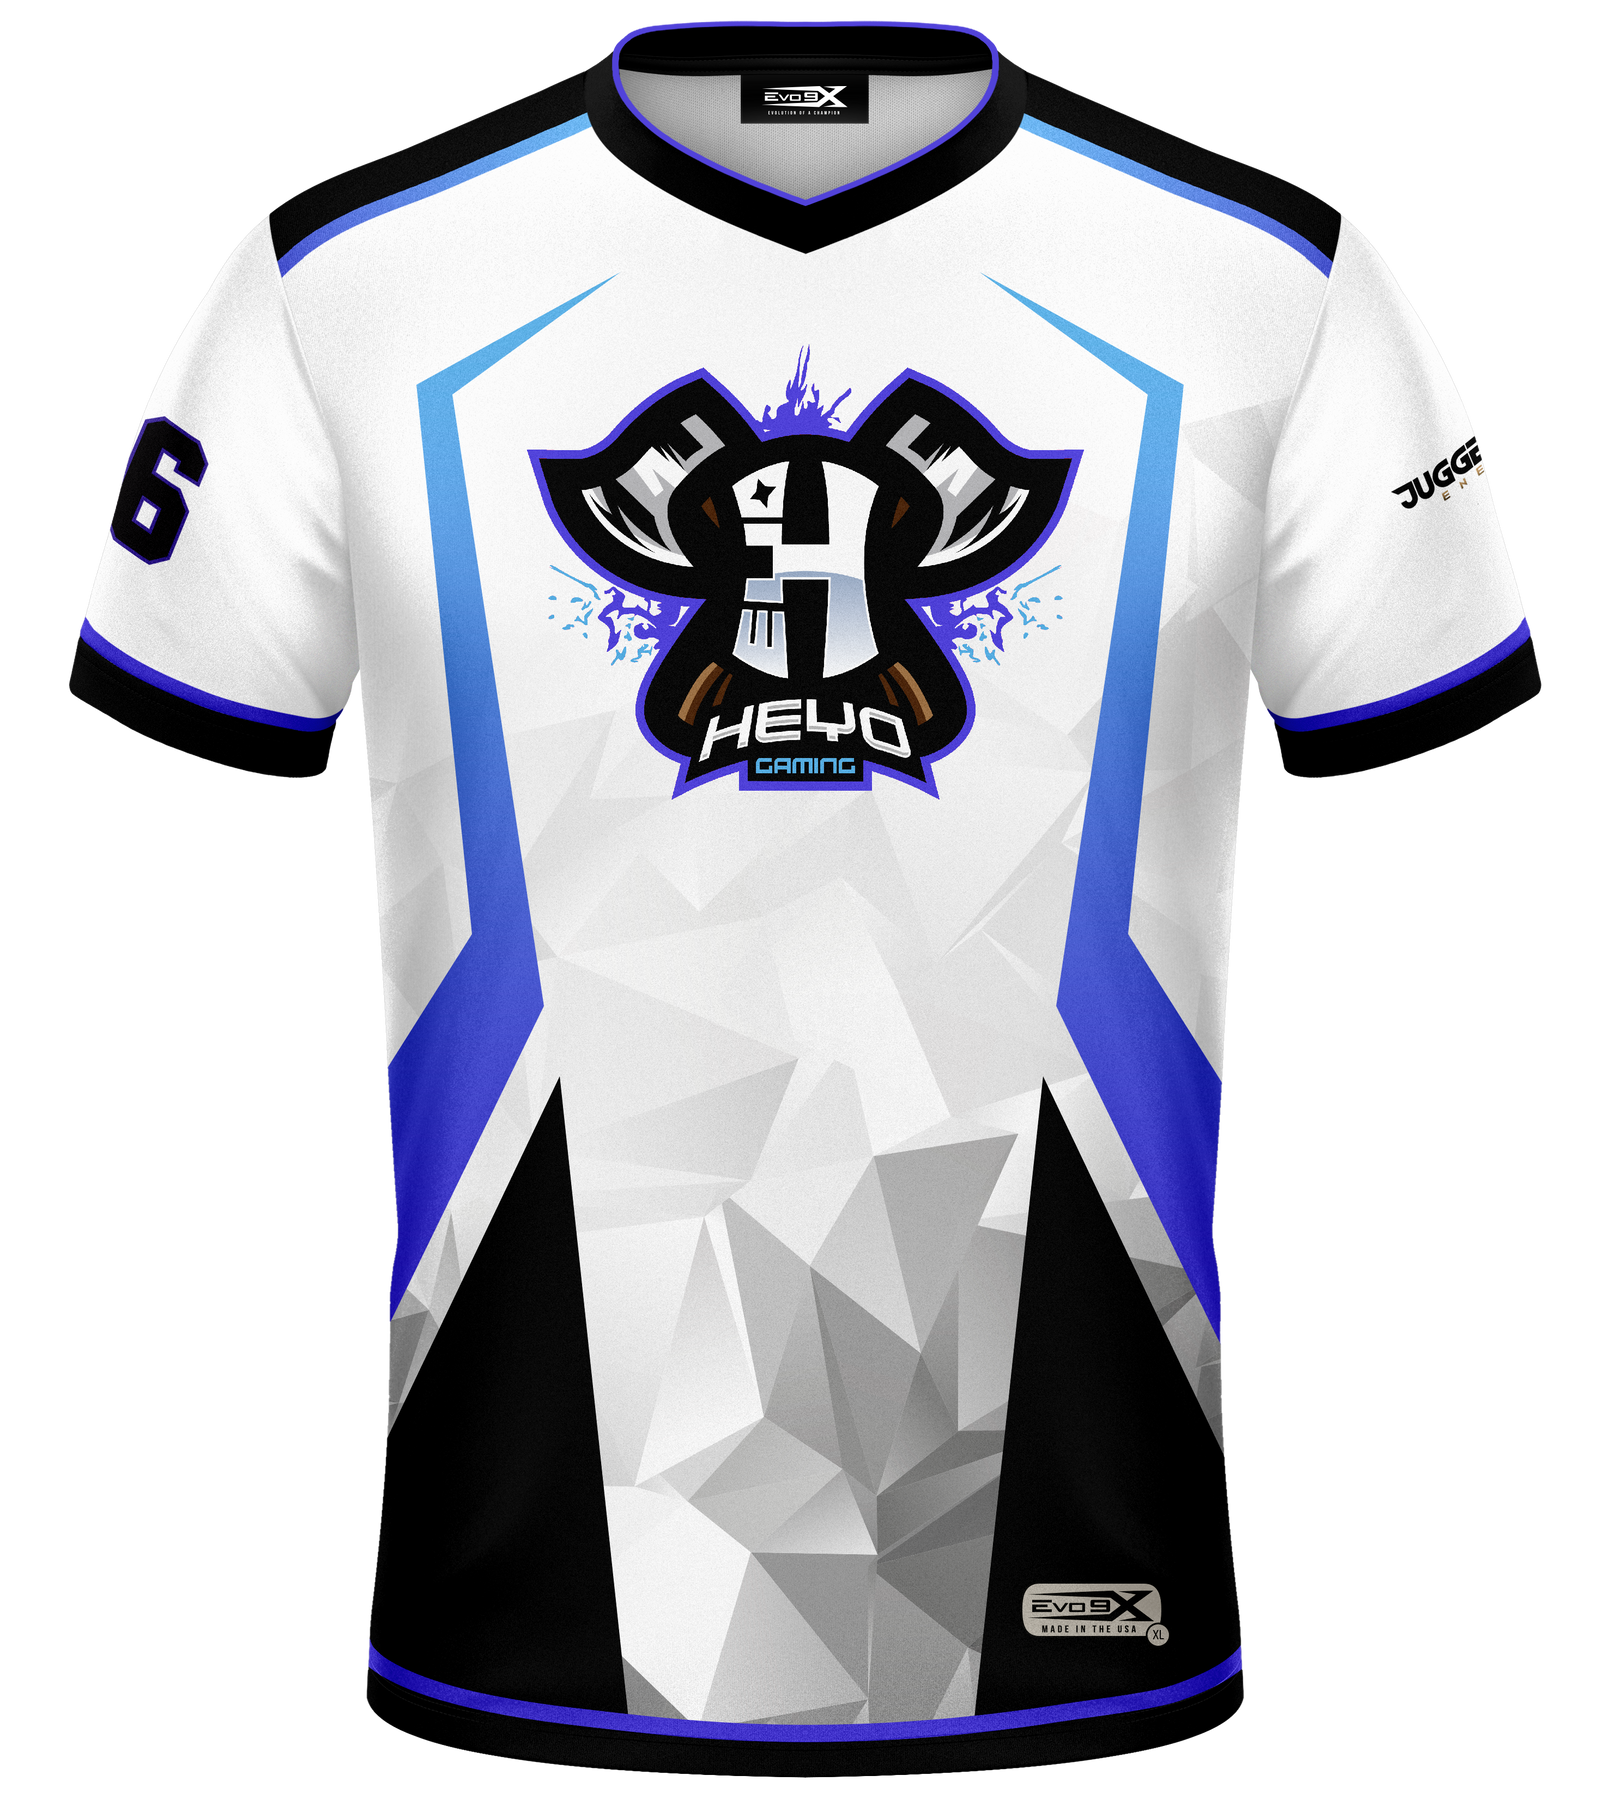 HEYO Gaming Official 2021 Pro Jersey – Evo9x Esports